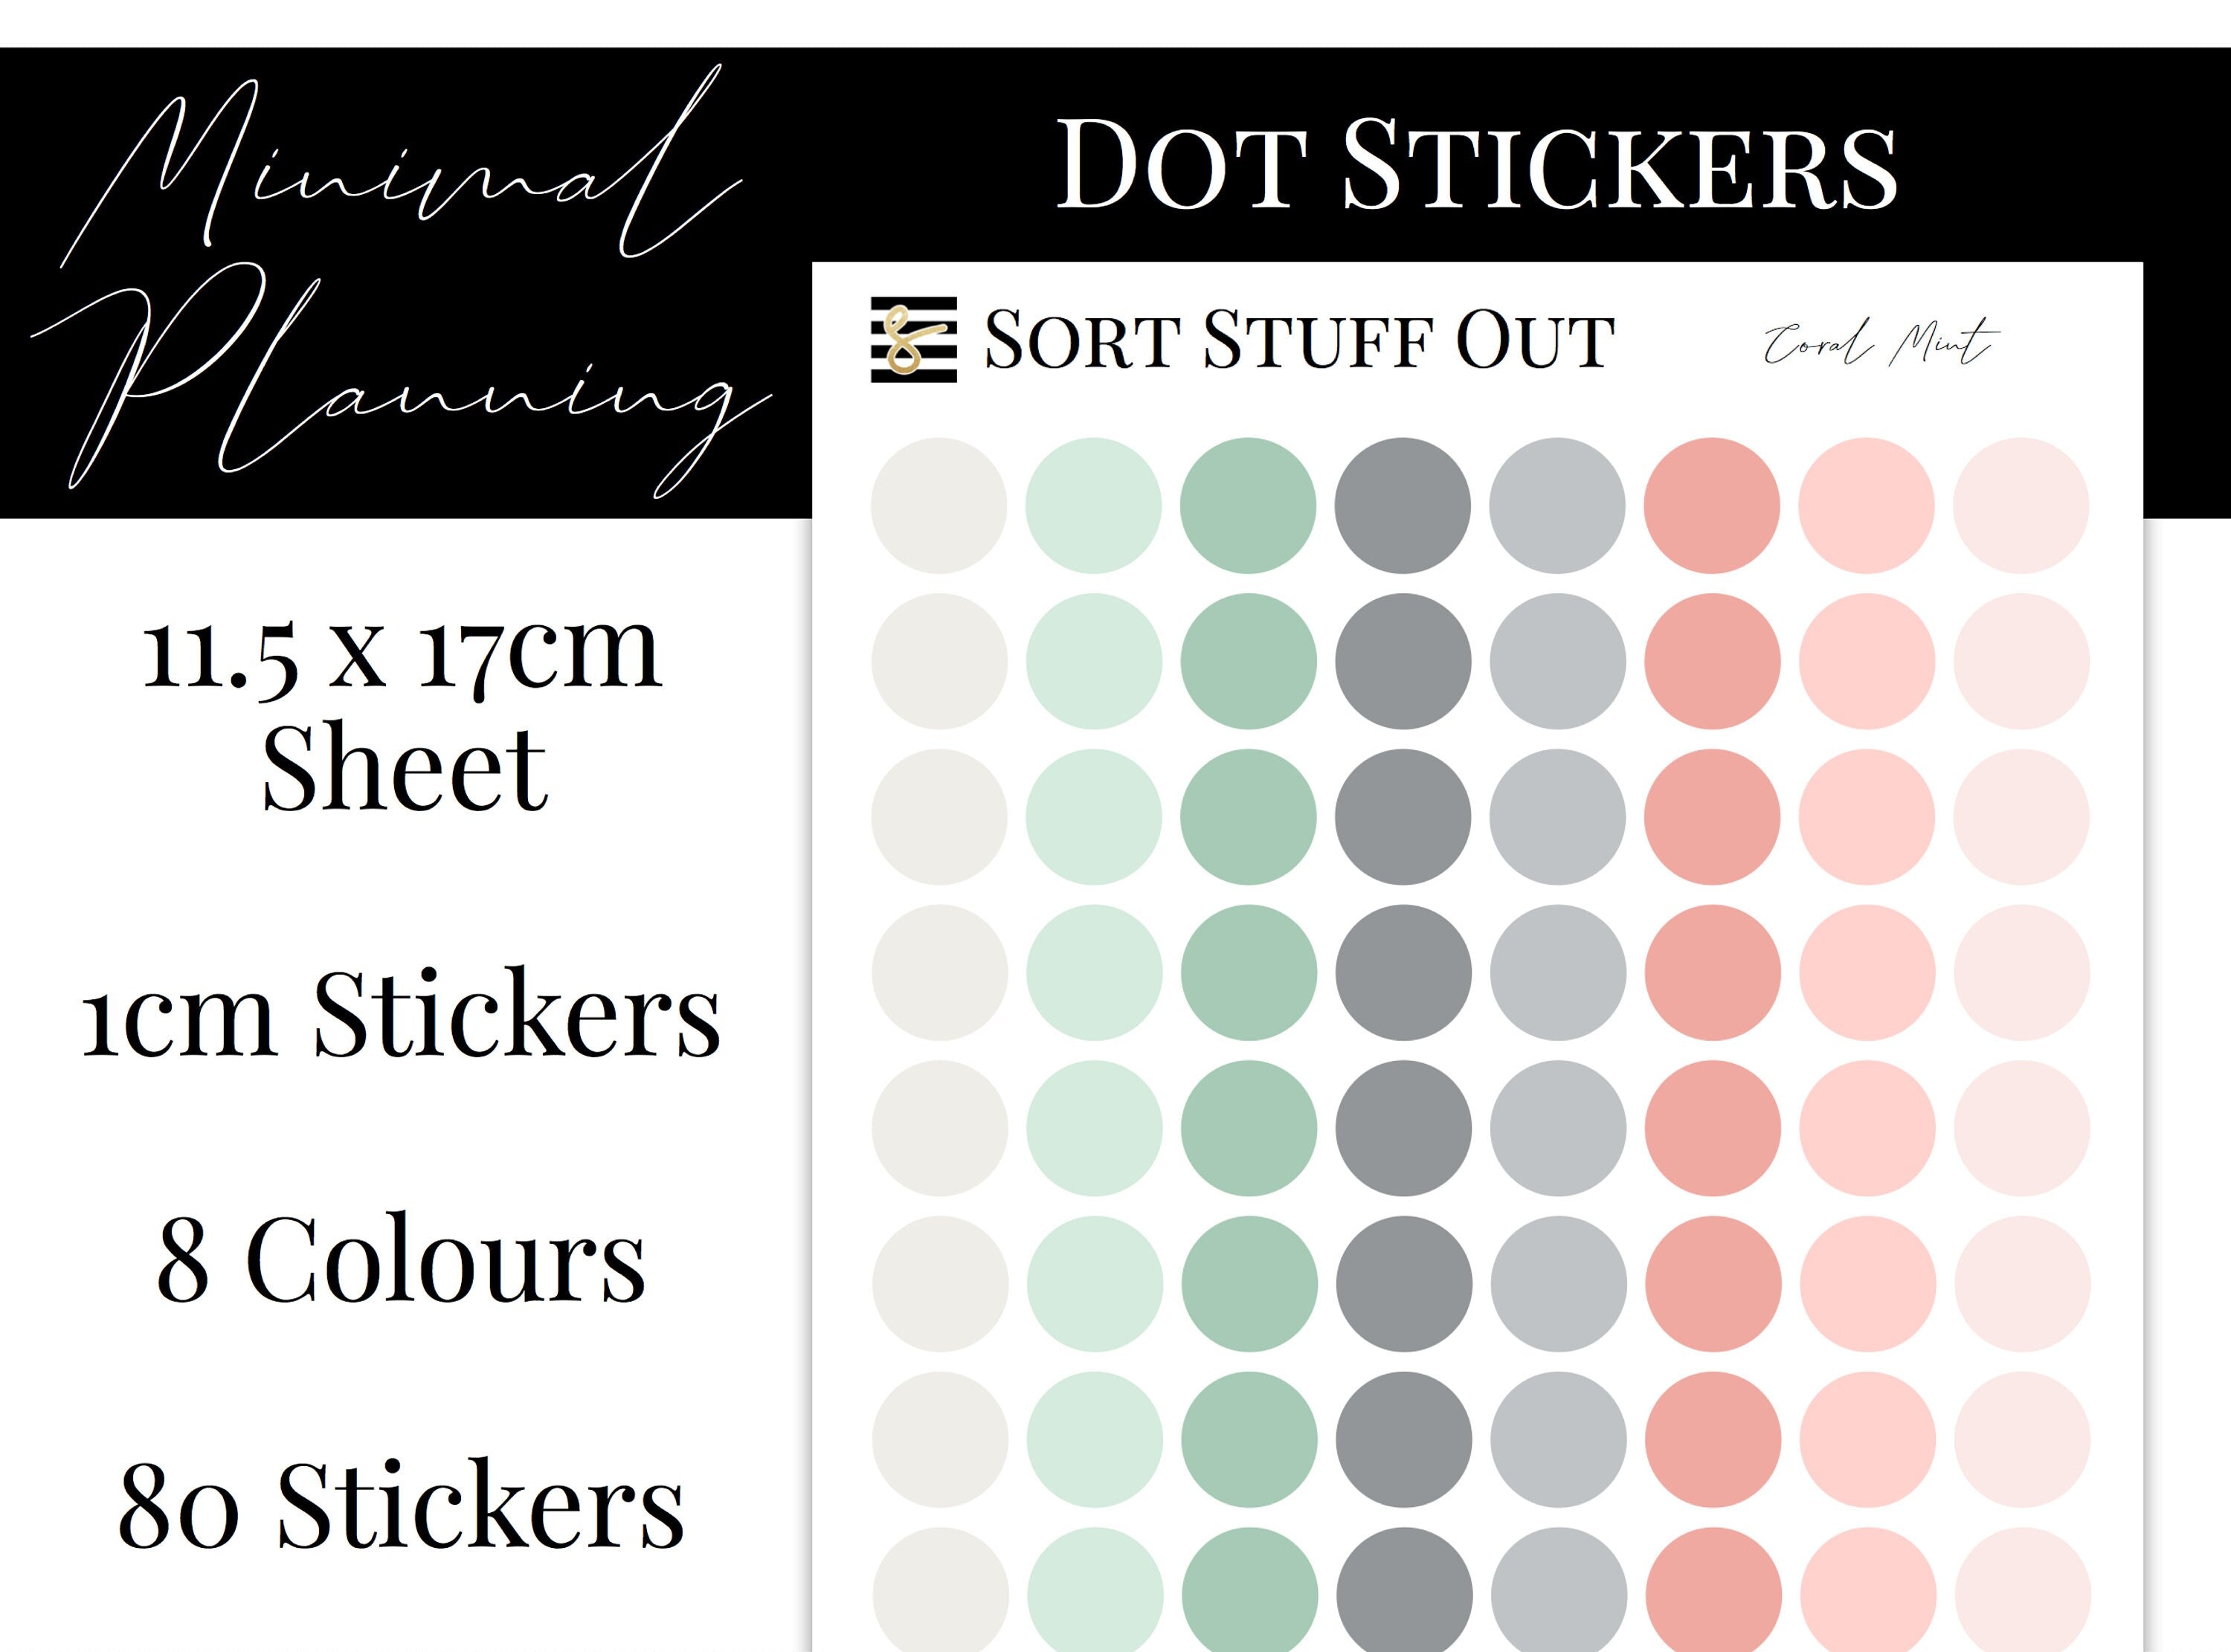 Coral Mint Planner Dot Stickers